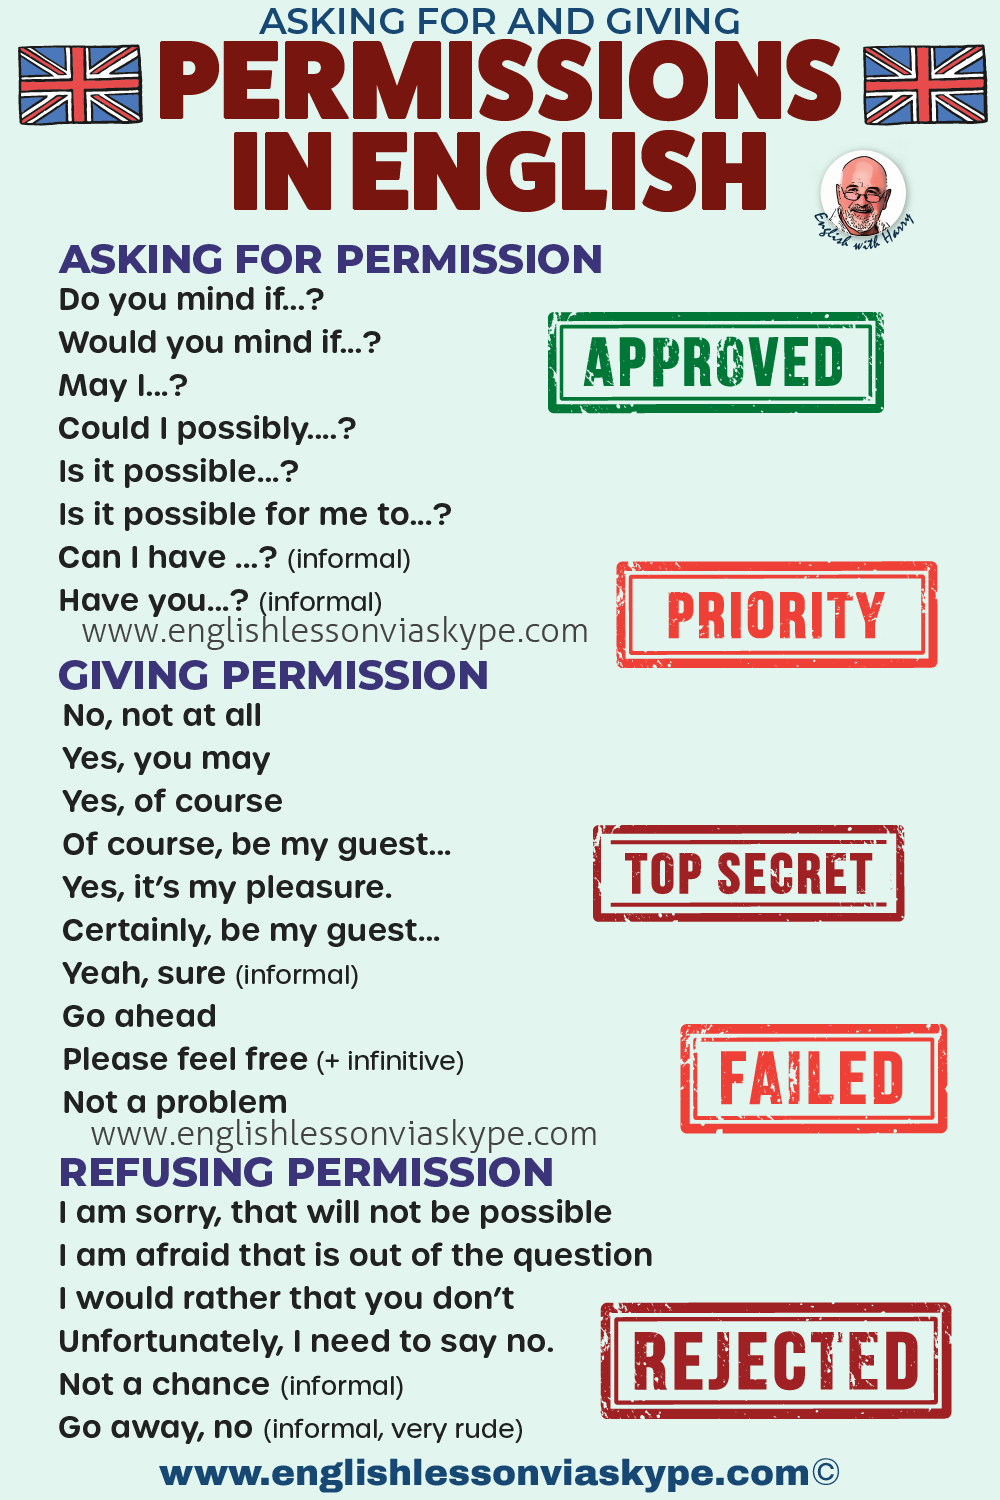 How to ask for and give permission in English? Asking for and giving permission in English. www.englishlessonviaskype.com #learnenglish #englishlessons #tienganh #EnglishTeacher #vocabulary #ingles #อังกฤษ #английский #aprenderingles #english #cursodeingles #учианглийский #vocabulário #dicasdeingles #learningenglish #ingilizce #englishgrammar #englishvocabulary #ielts #idiomas